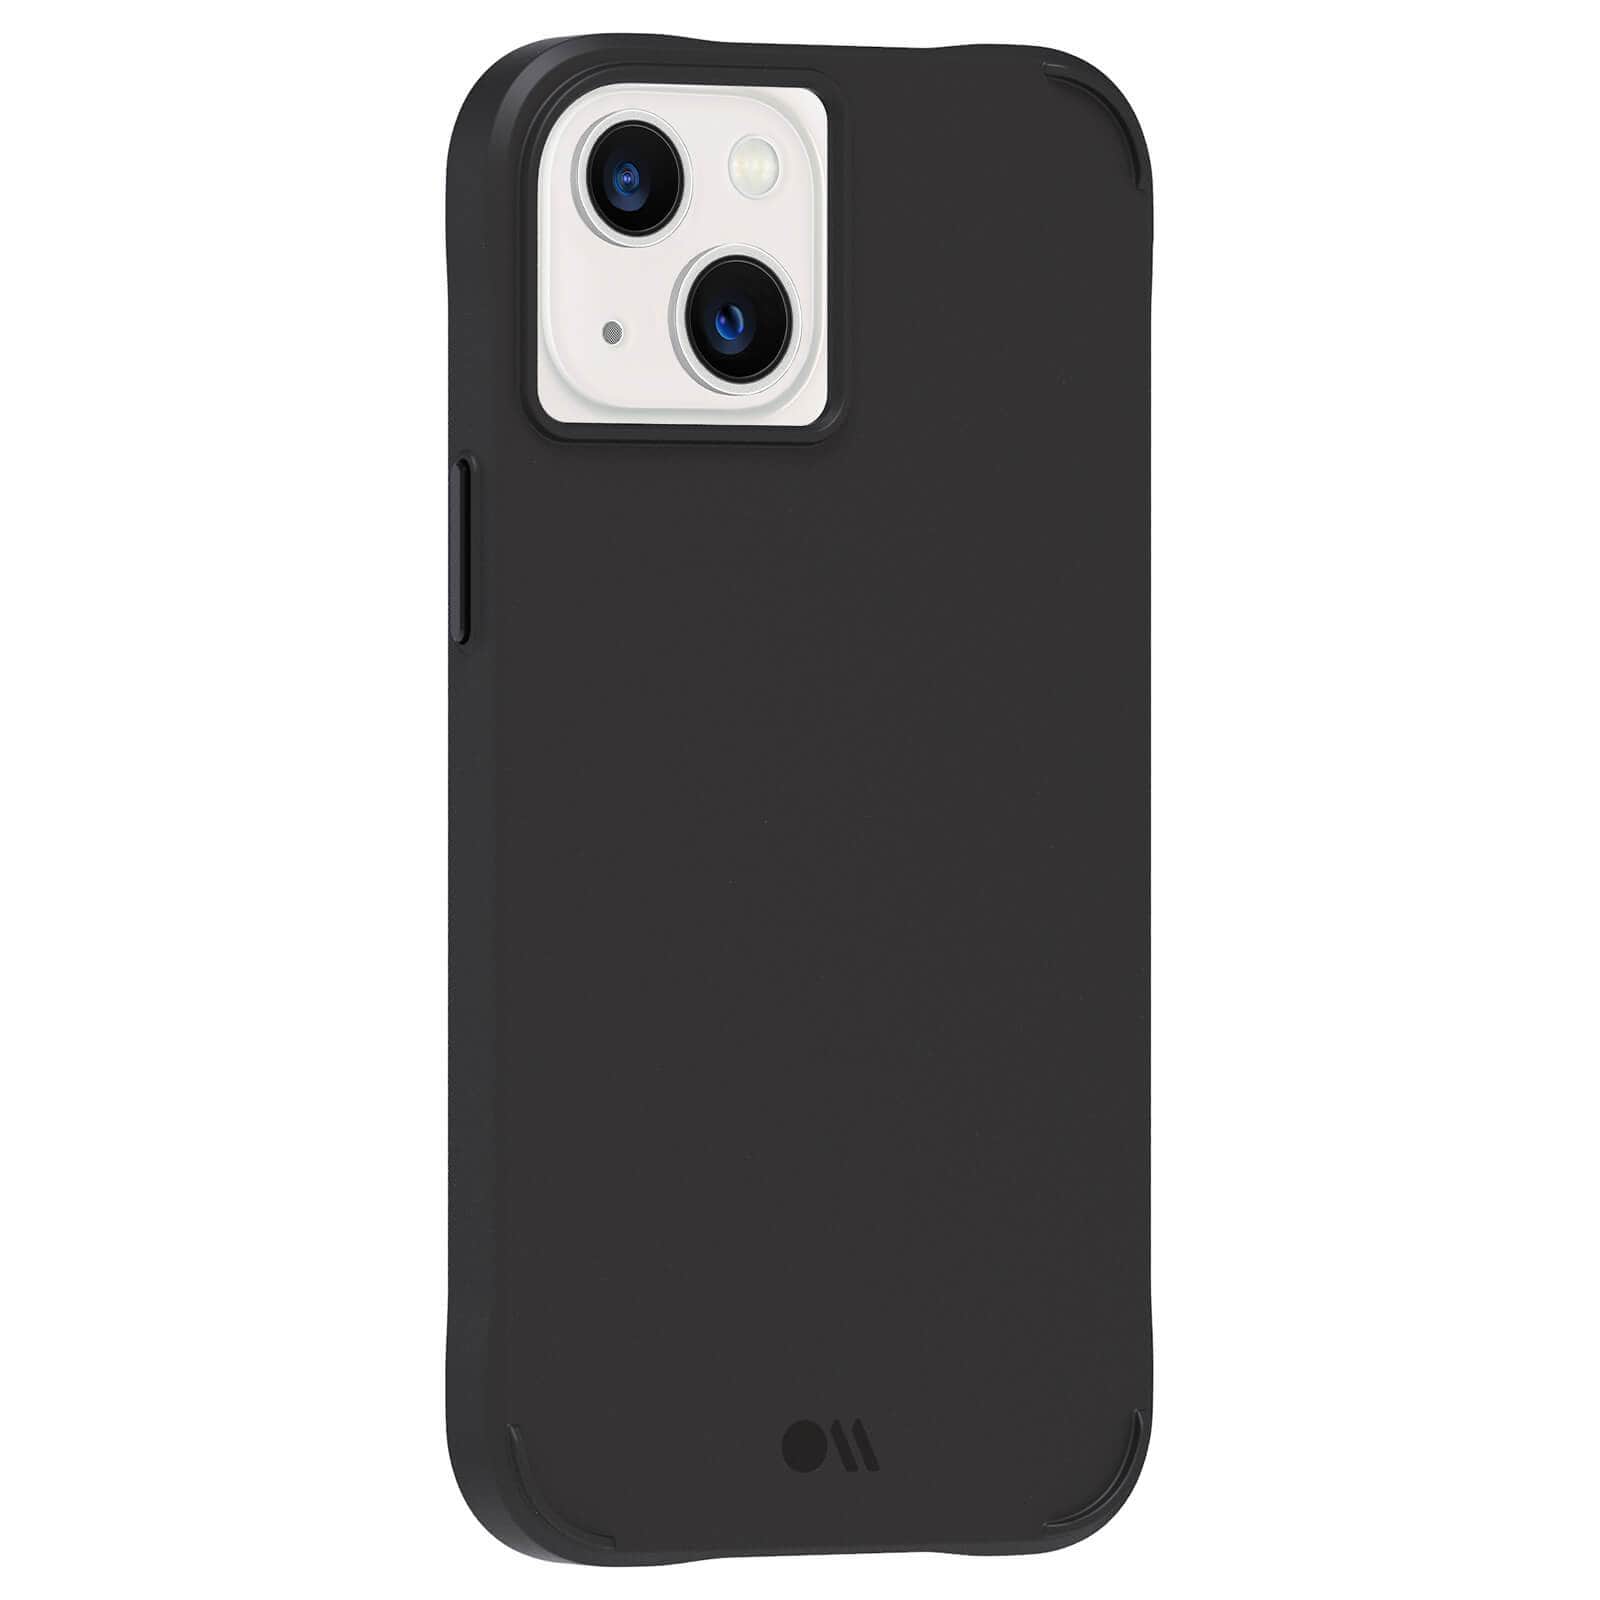 Thin, protective black case for iPhone. color::Black